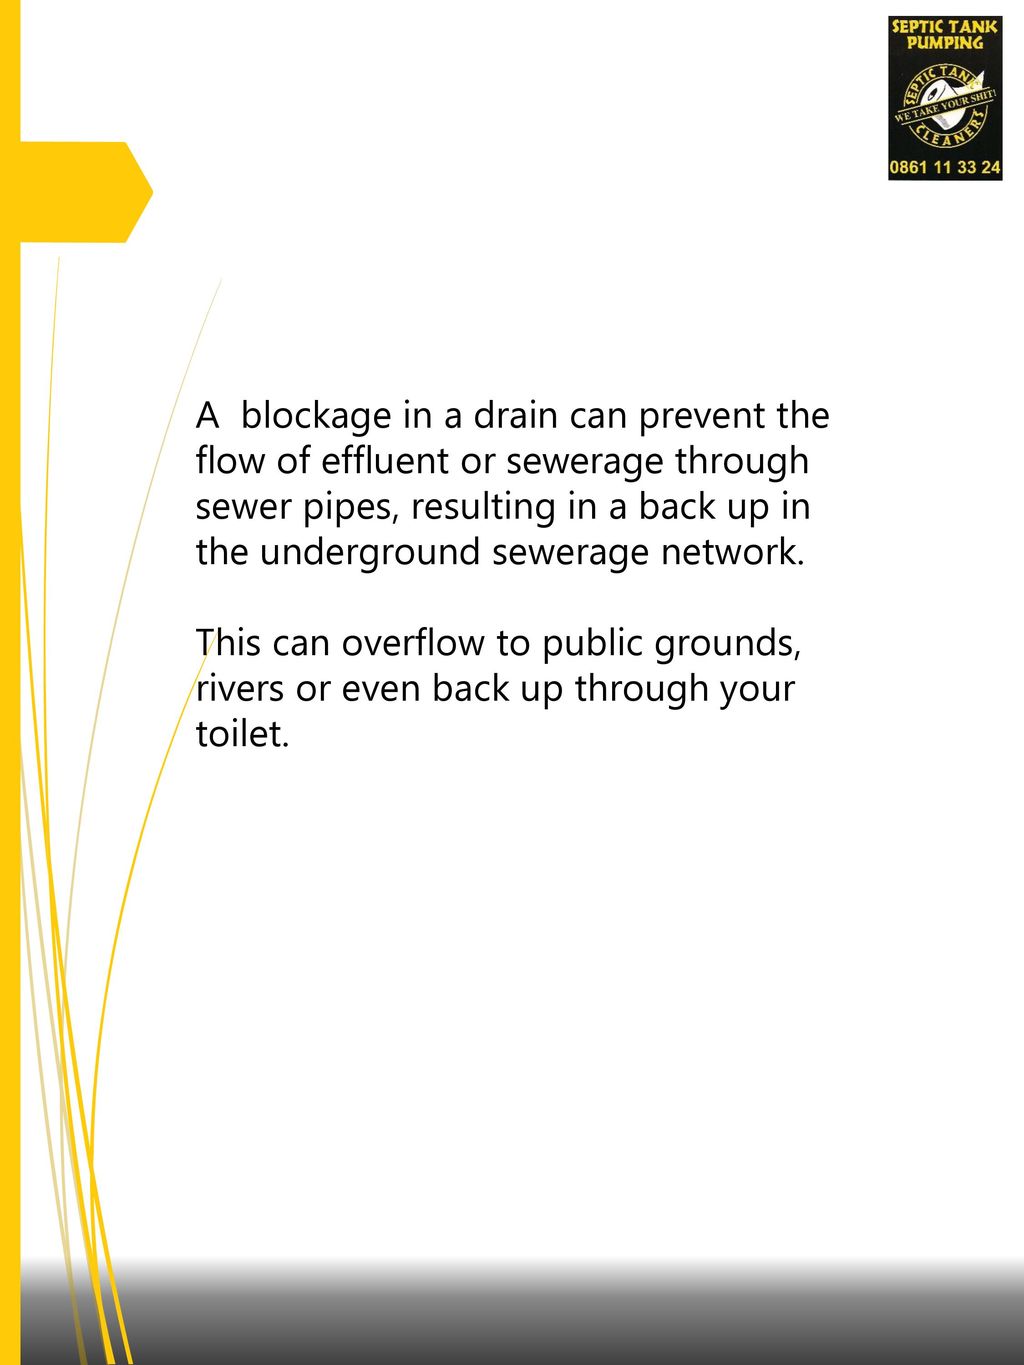 A blockage in a drain can prevent the flow of effluent or sewerage through sewer pipes, resulting in a back up in the underground sewerage network.